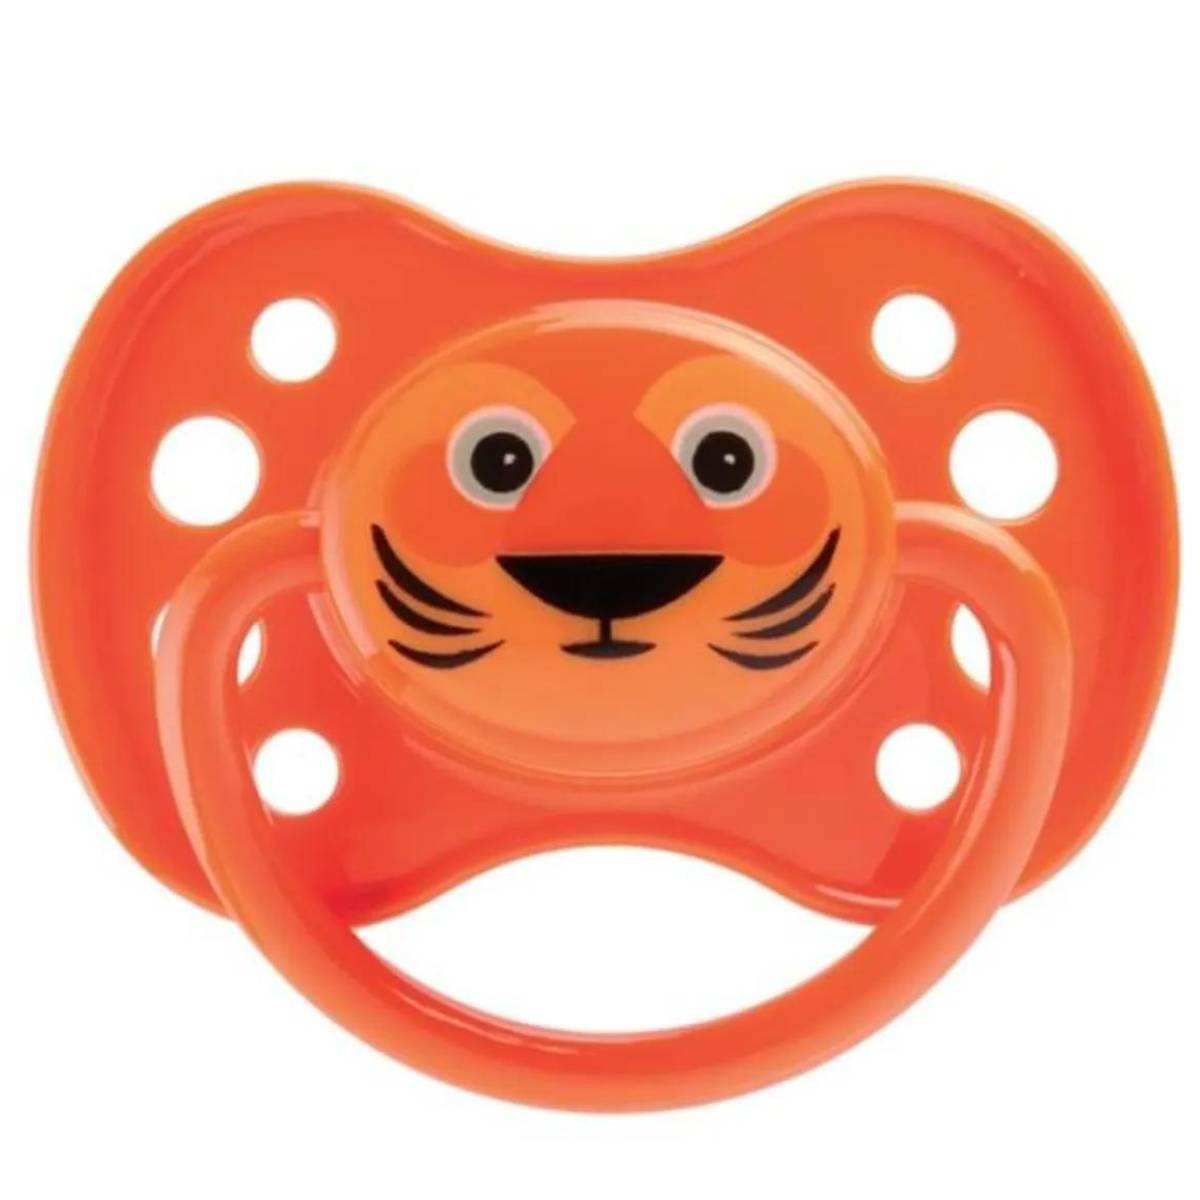 Dodie anatomical pacifier 6 months + silicone Penguin, Tiger, Elephant